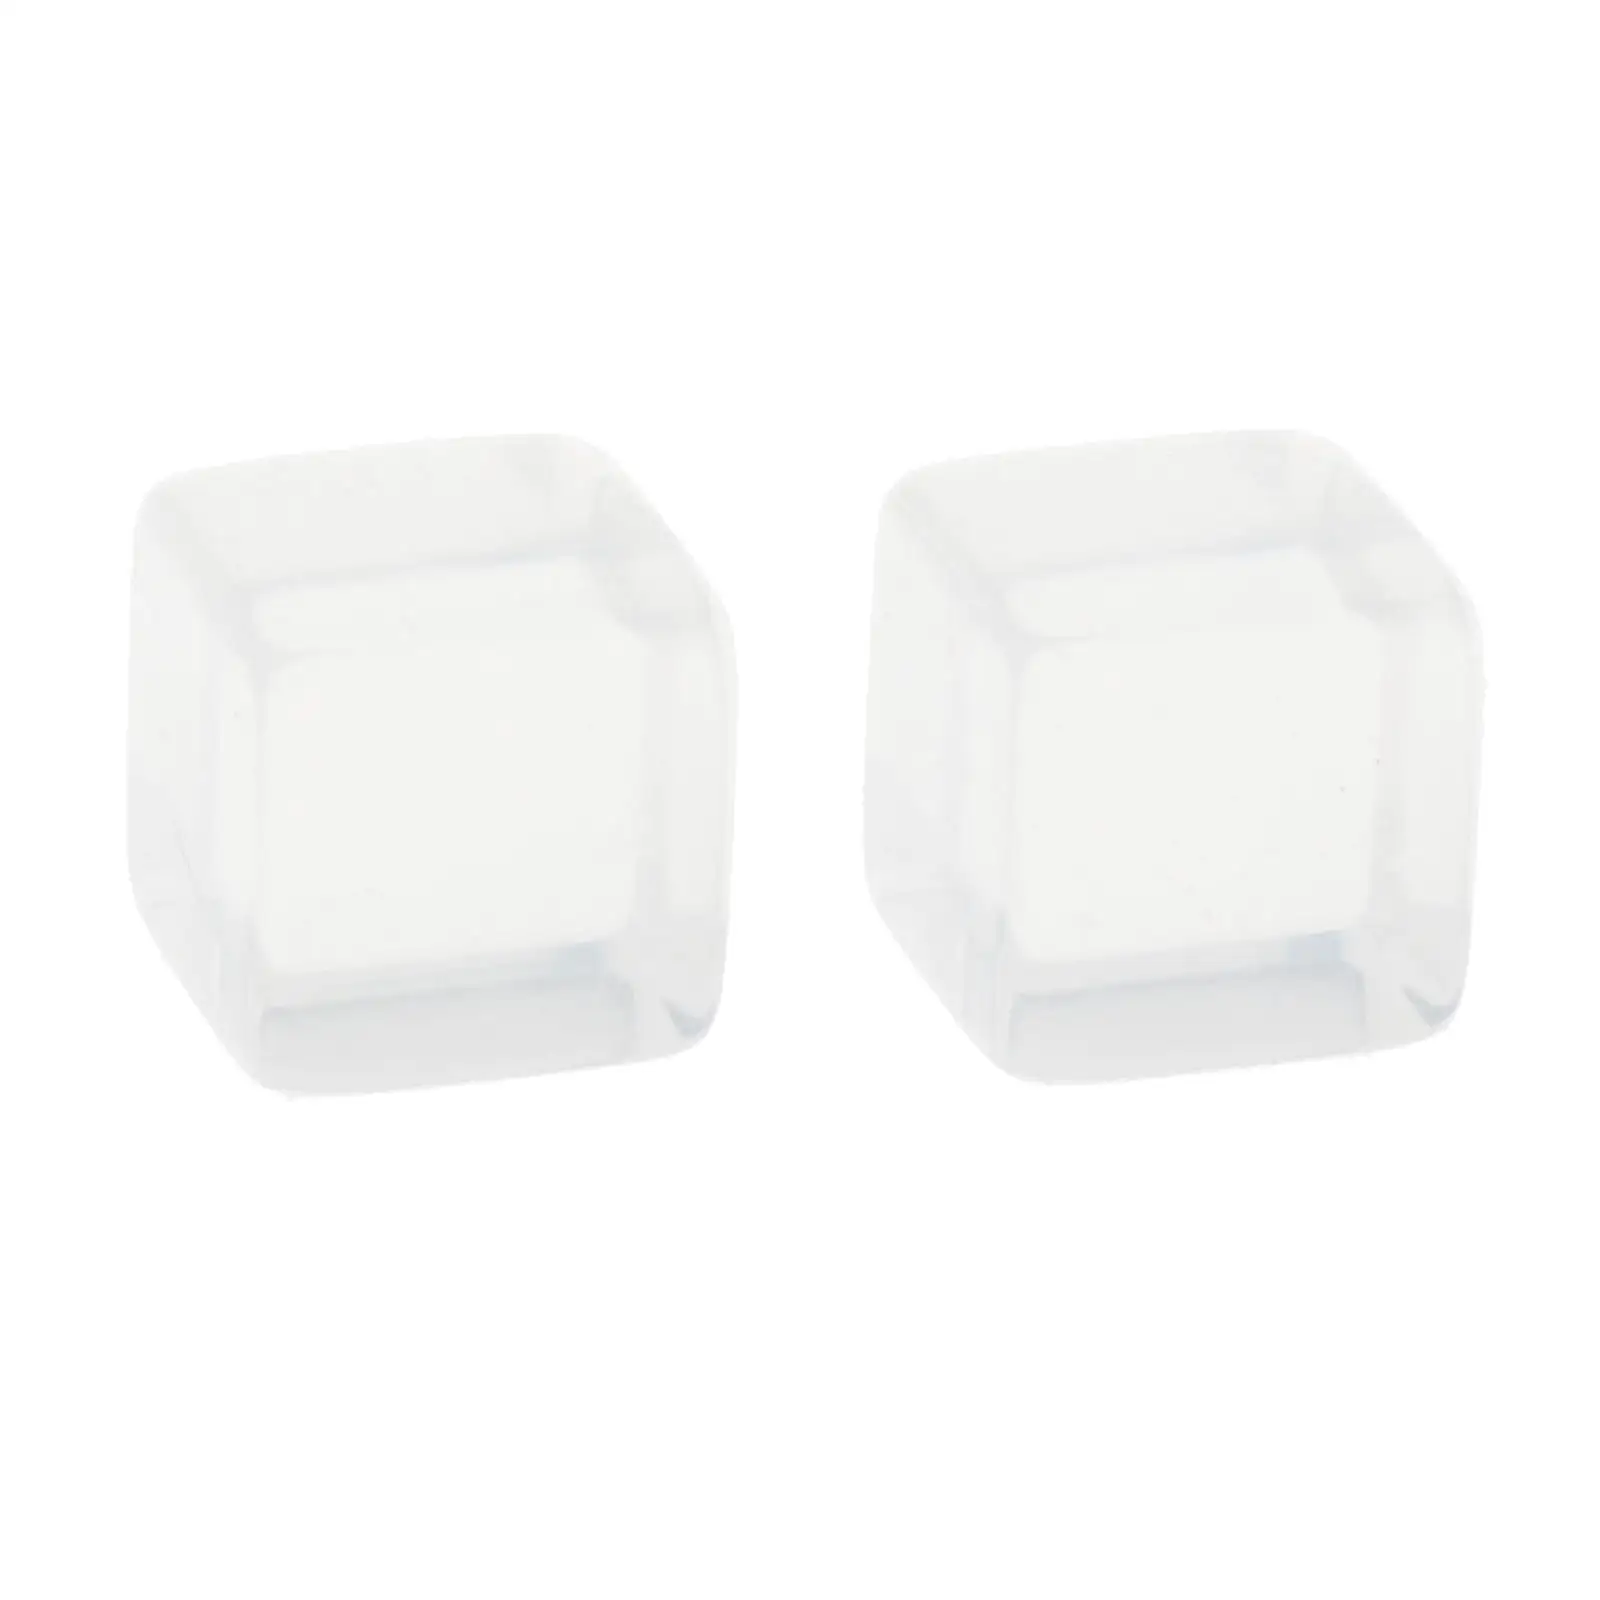 10 Pieces Acrylic 16mm Six Sides Dice Acrylic for Party Supplies,Dice Making